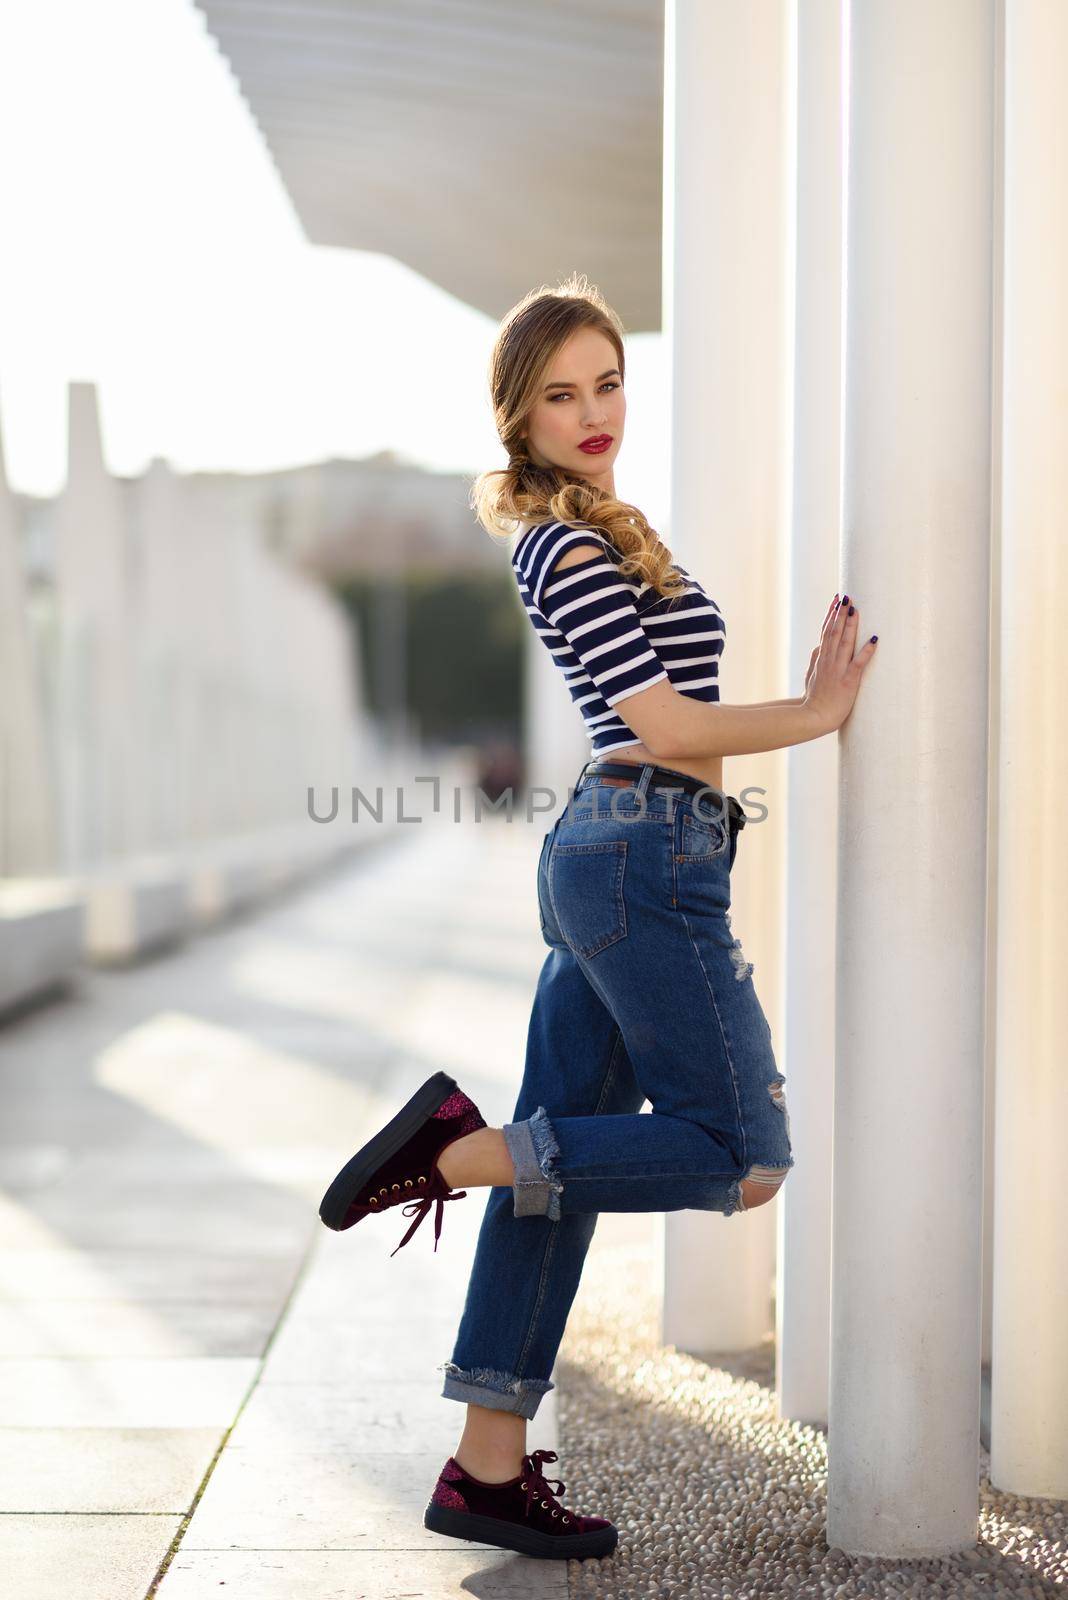 Blonde woman, model of fashion, possing in urban background. Beautiful young girl wearing striped t-shirt and blue jeans in the street. Pretty russian female with pigtail.